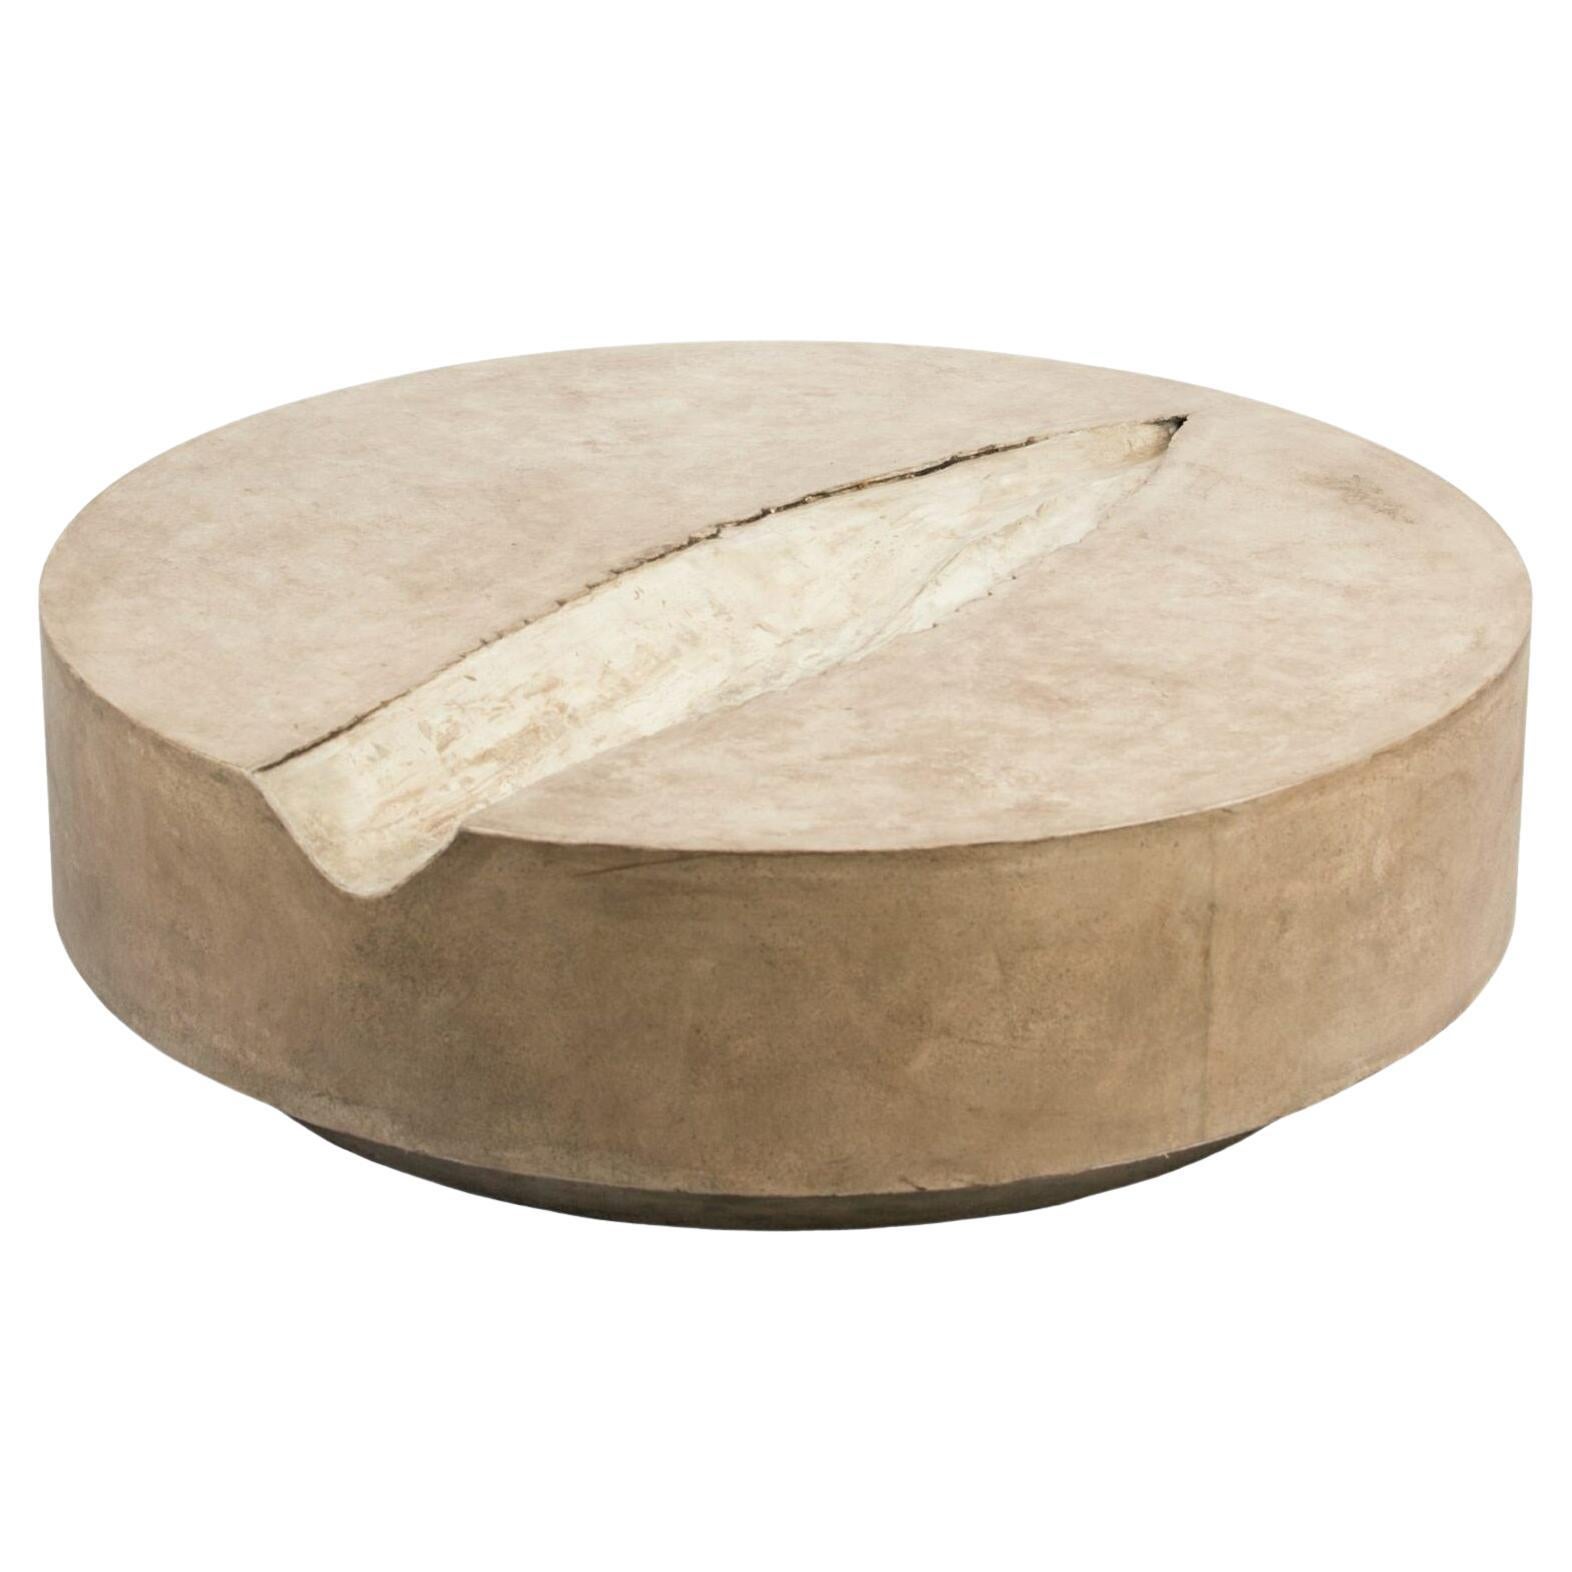 American Customizable Botanical Concrete Coffee Tables with Leaf Impressions, 'Freyja' For Sale